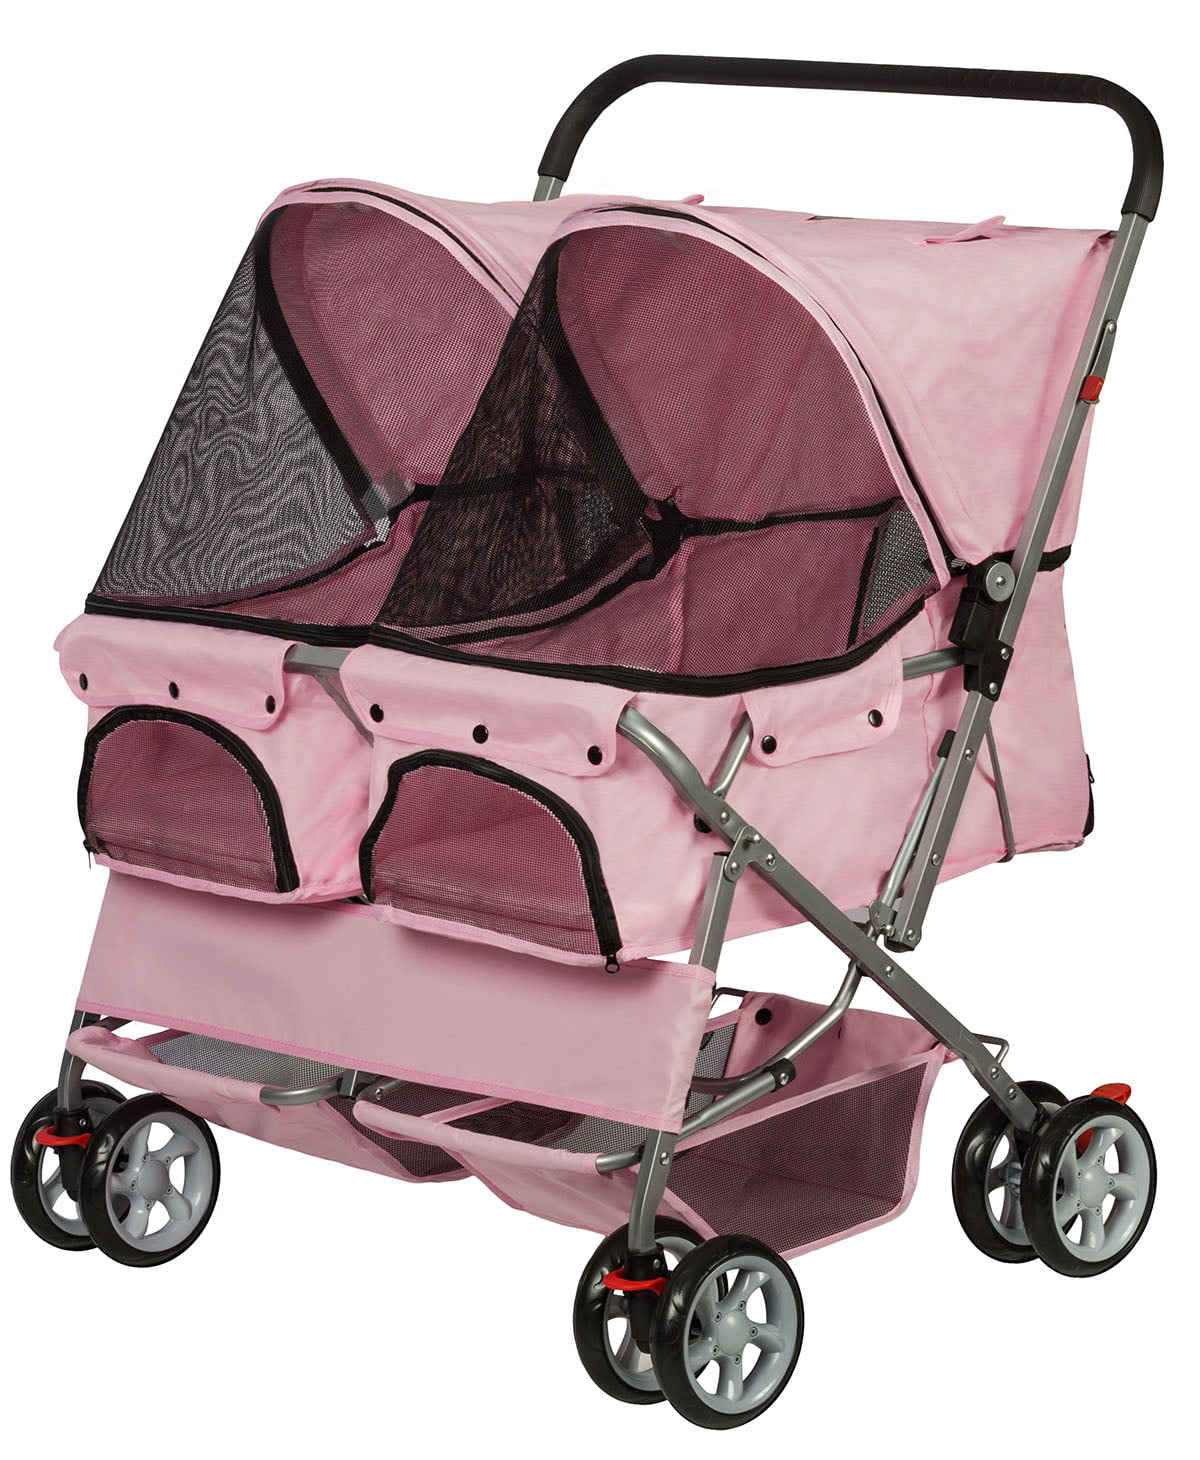 baby pram with dog compartment